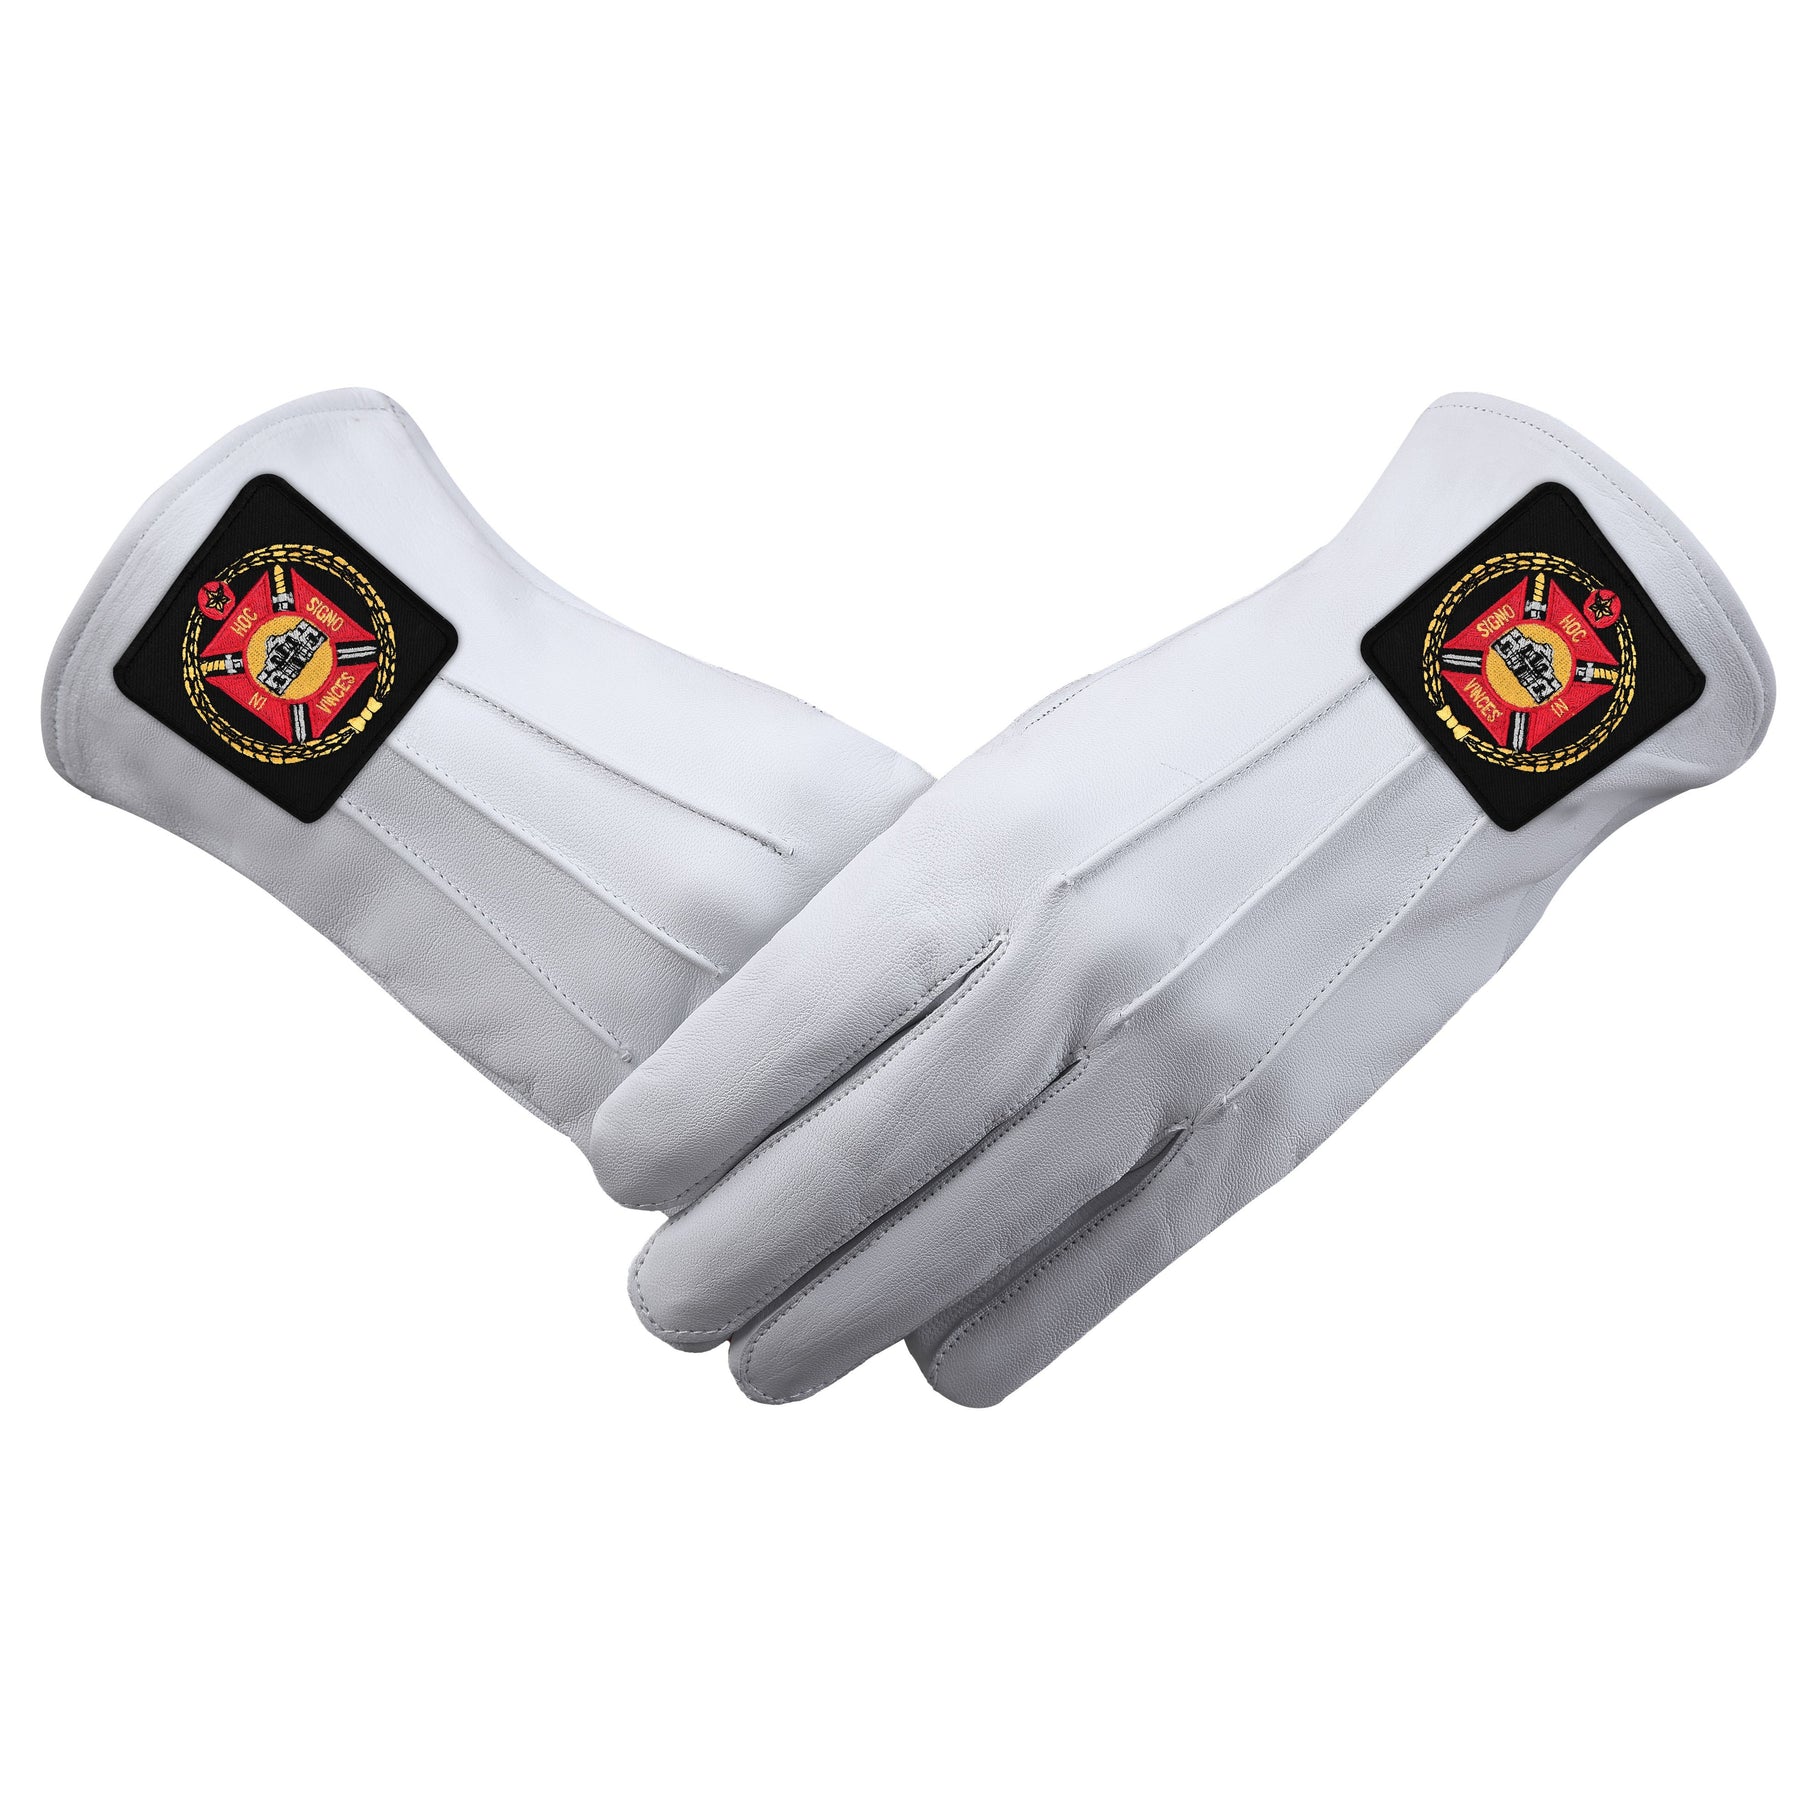 Knights Templar Commandery Glove - White Leather With Black Patch - Bricks Masons